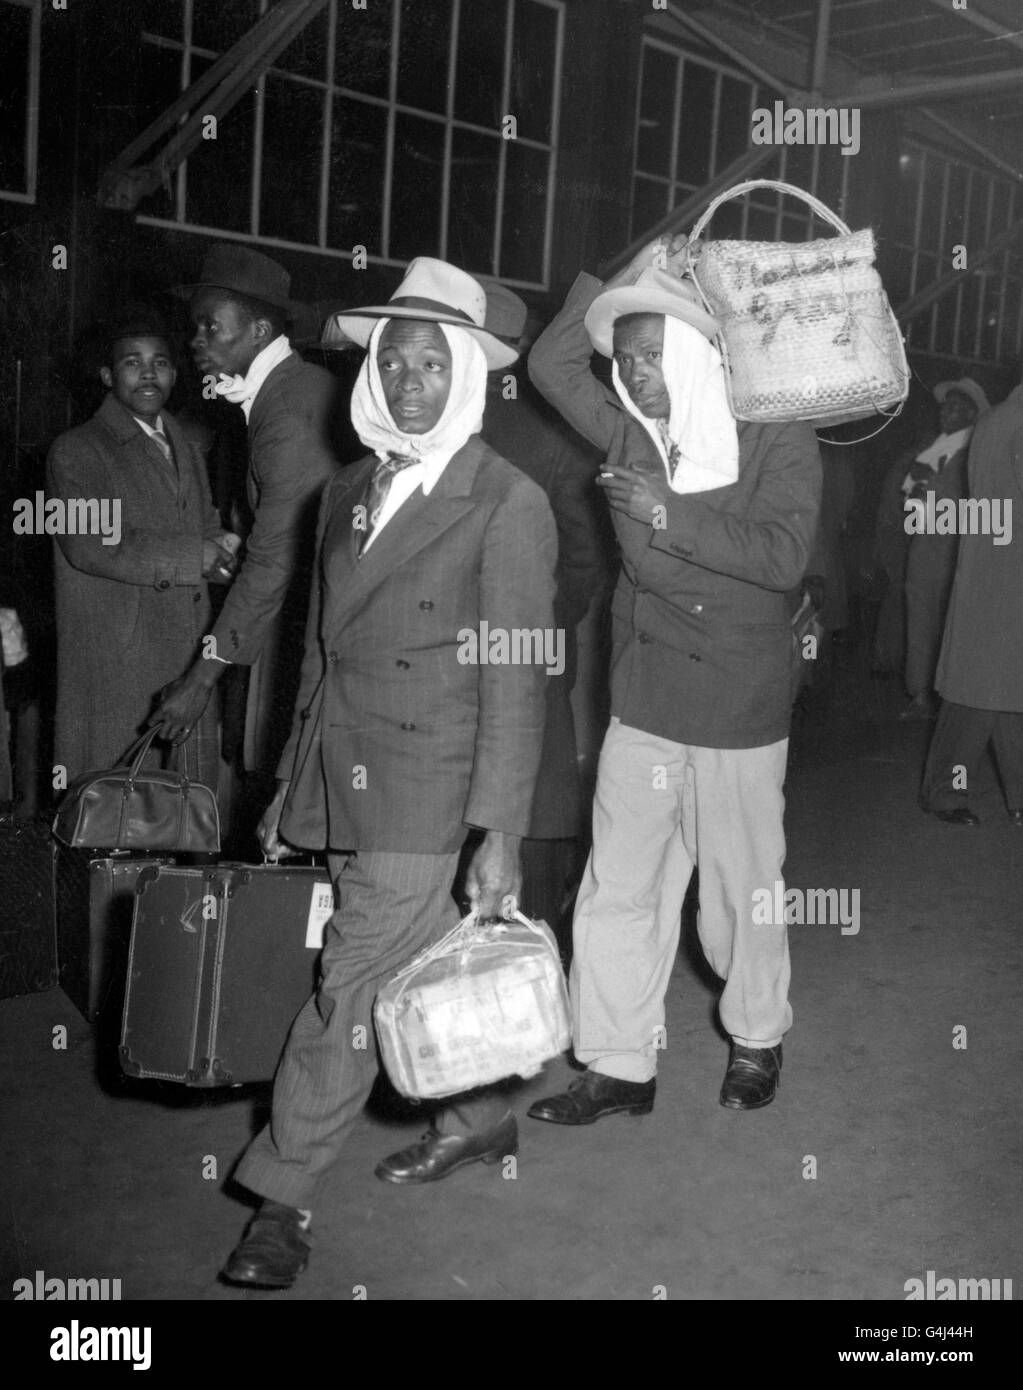 With heads muffled against the cold, men from Jamaica arrive at Victoria Station, London, in search of jobs and somewhere to live. They were among 400 Jamaicans, who had landed at Folkestone after travelling across Europe. Stock Photo